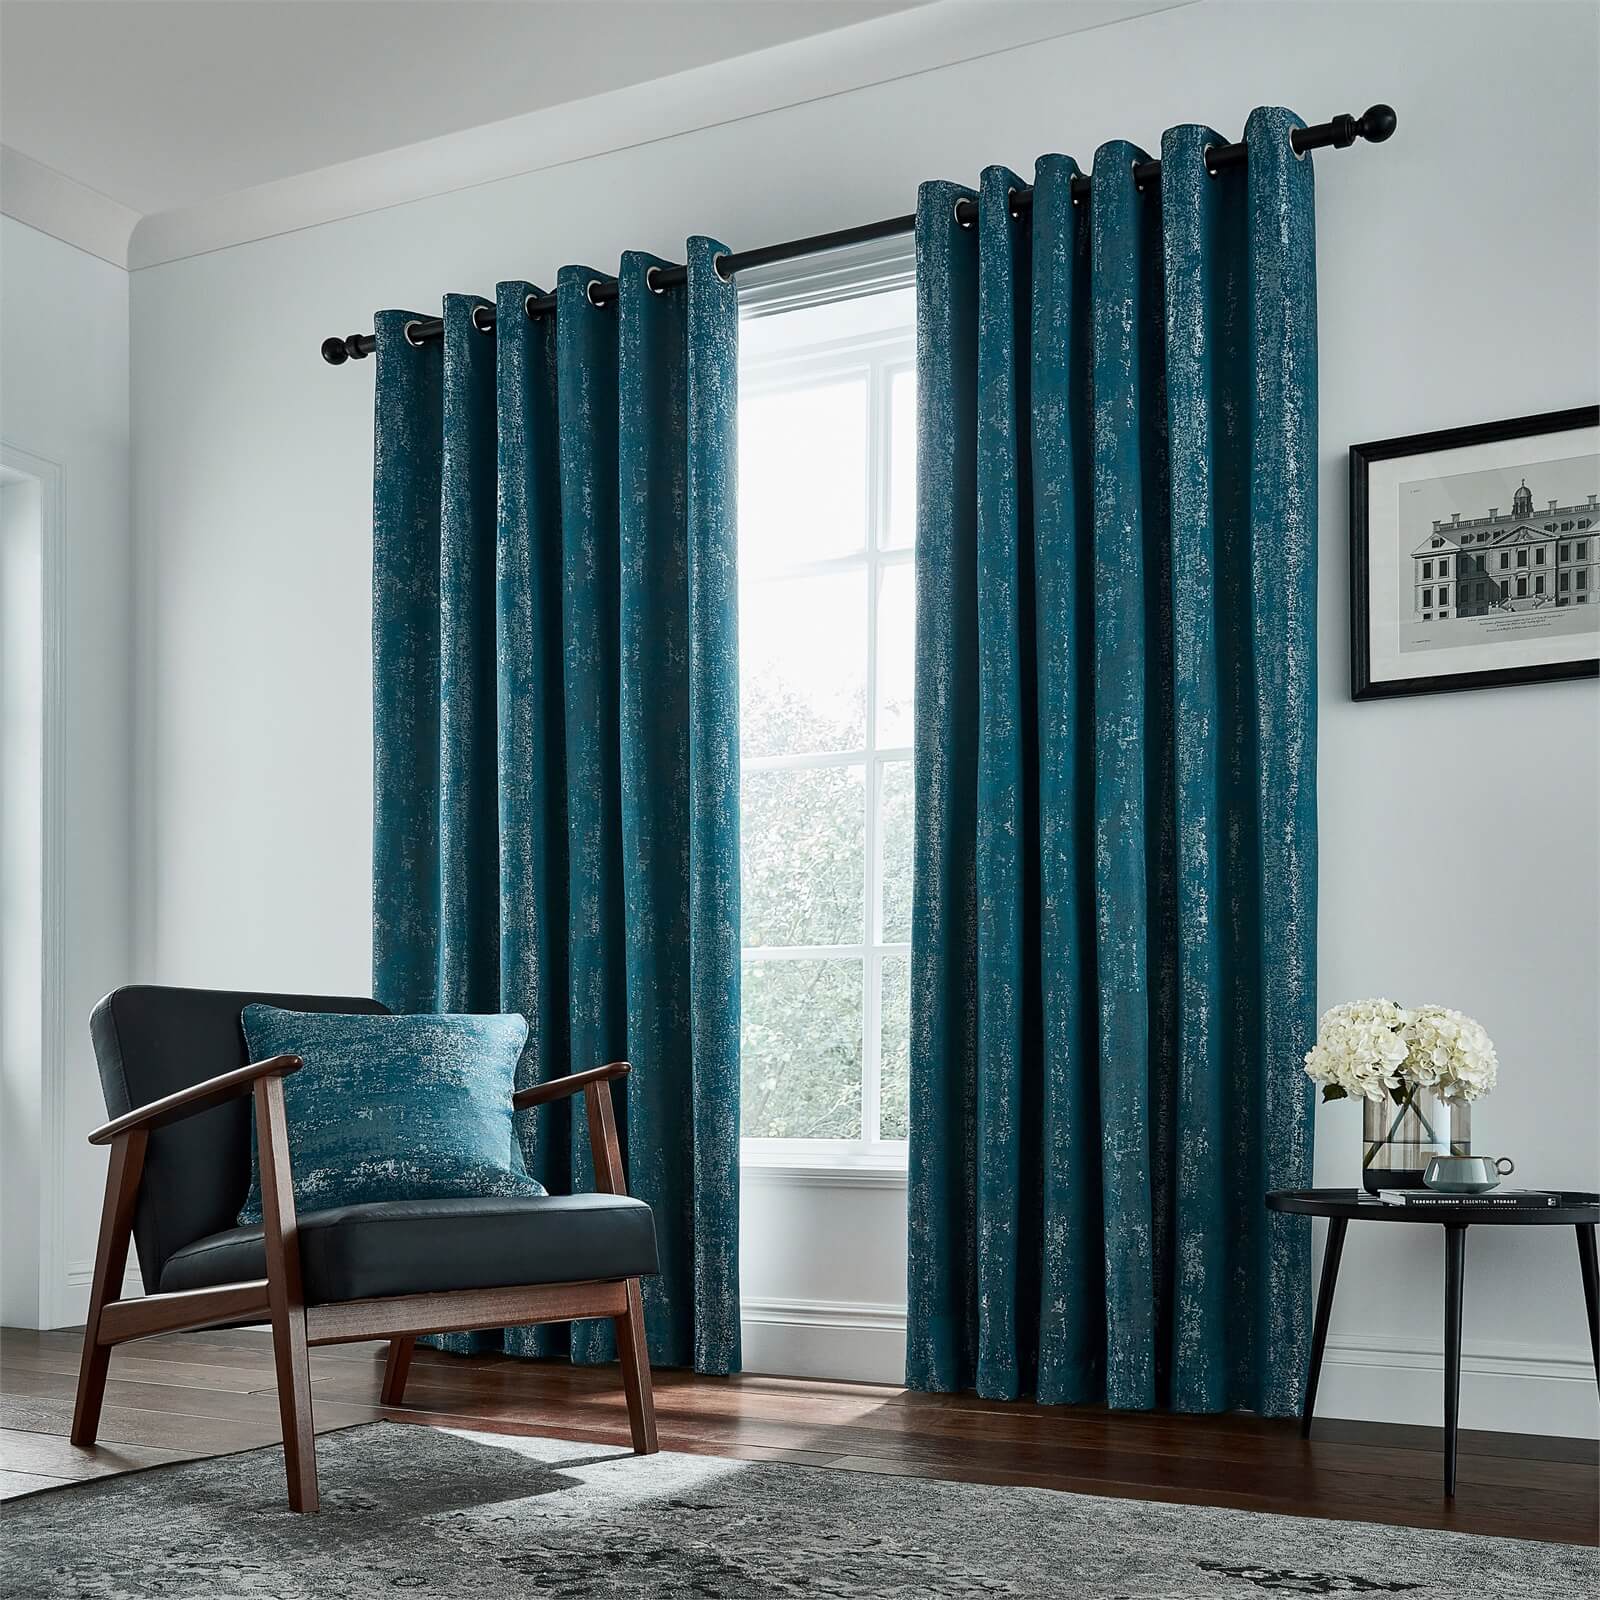 Peacock Blue Hotel Collection Roma Lined Curtains 90 x 72 - Emerald